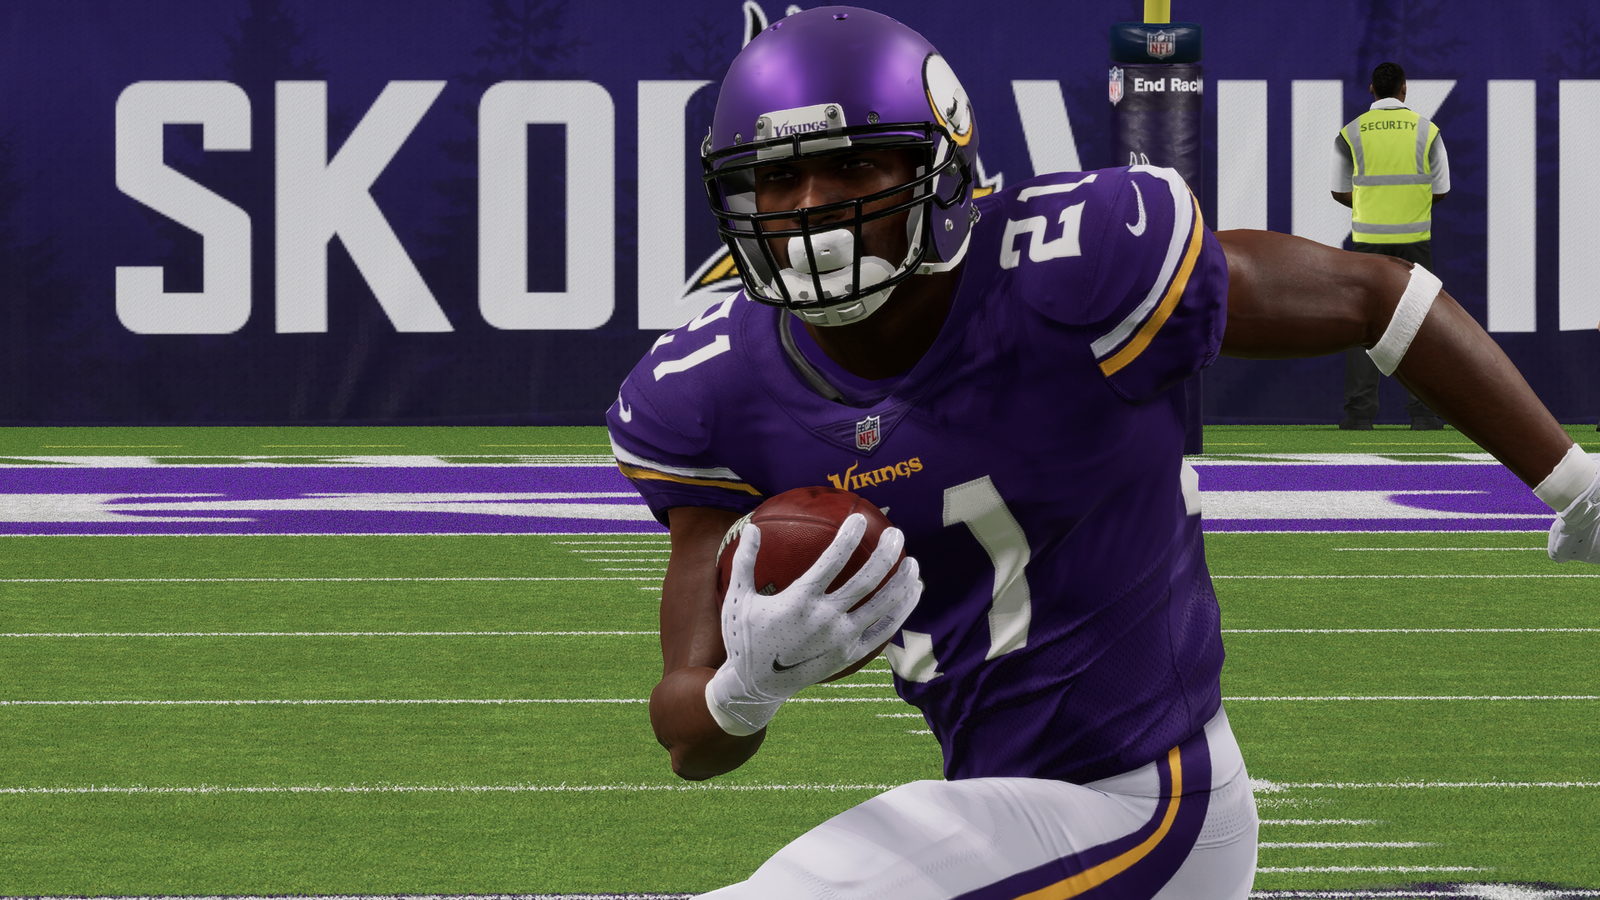 Madden 22 Update 2.05 Patch Notes